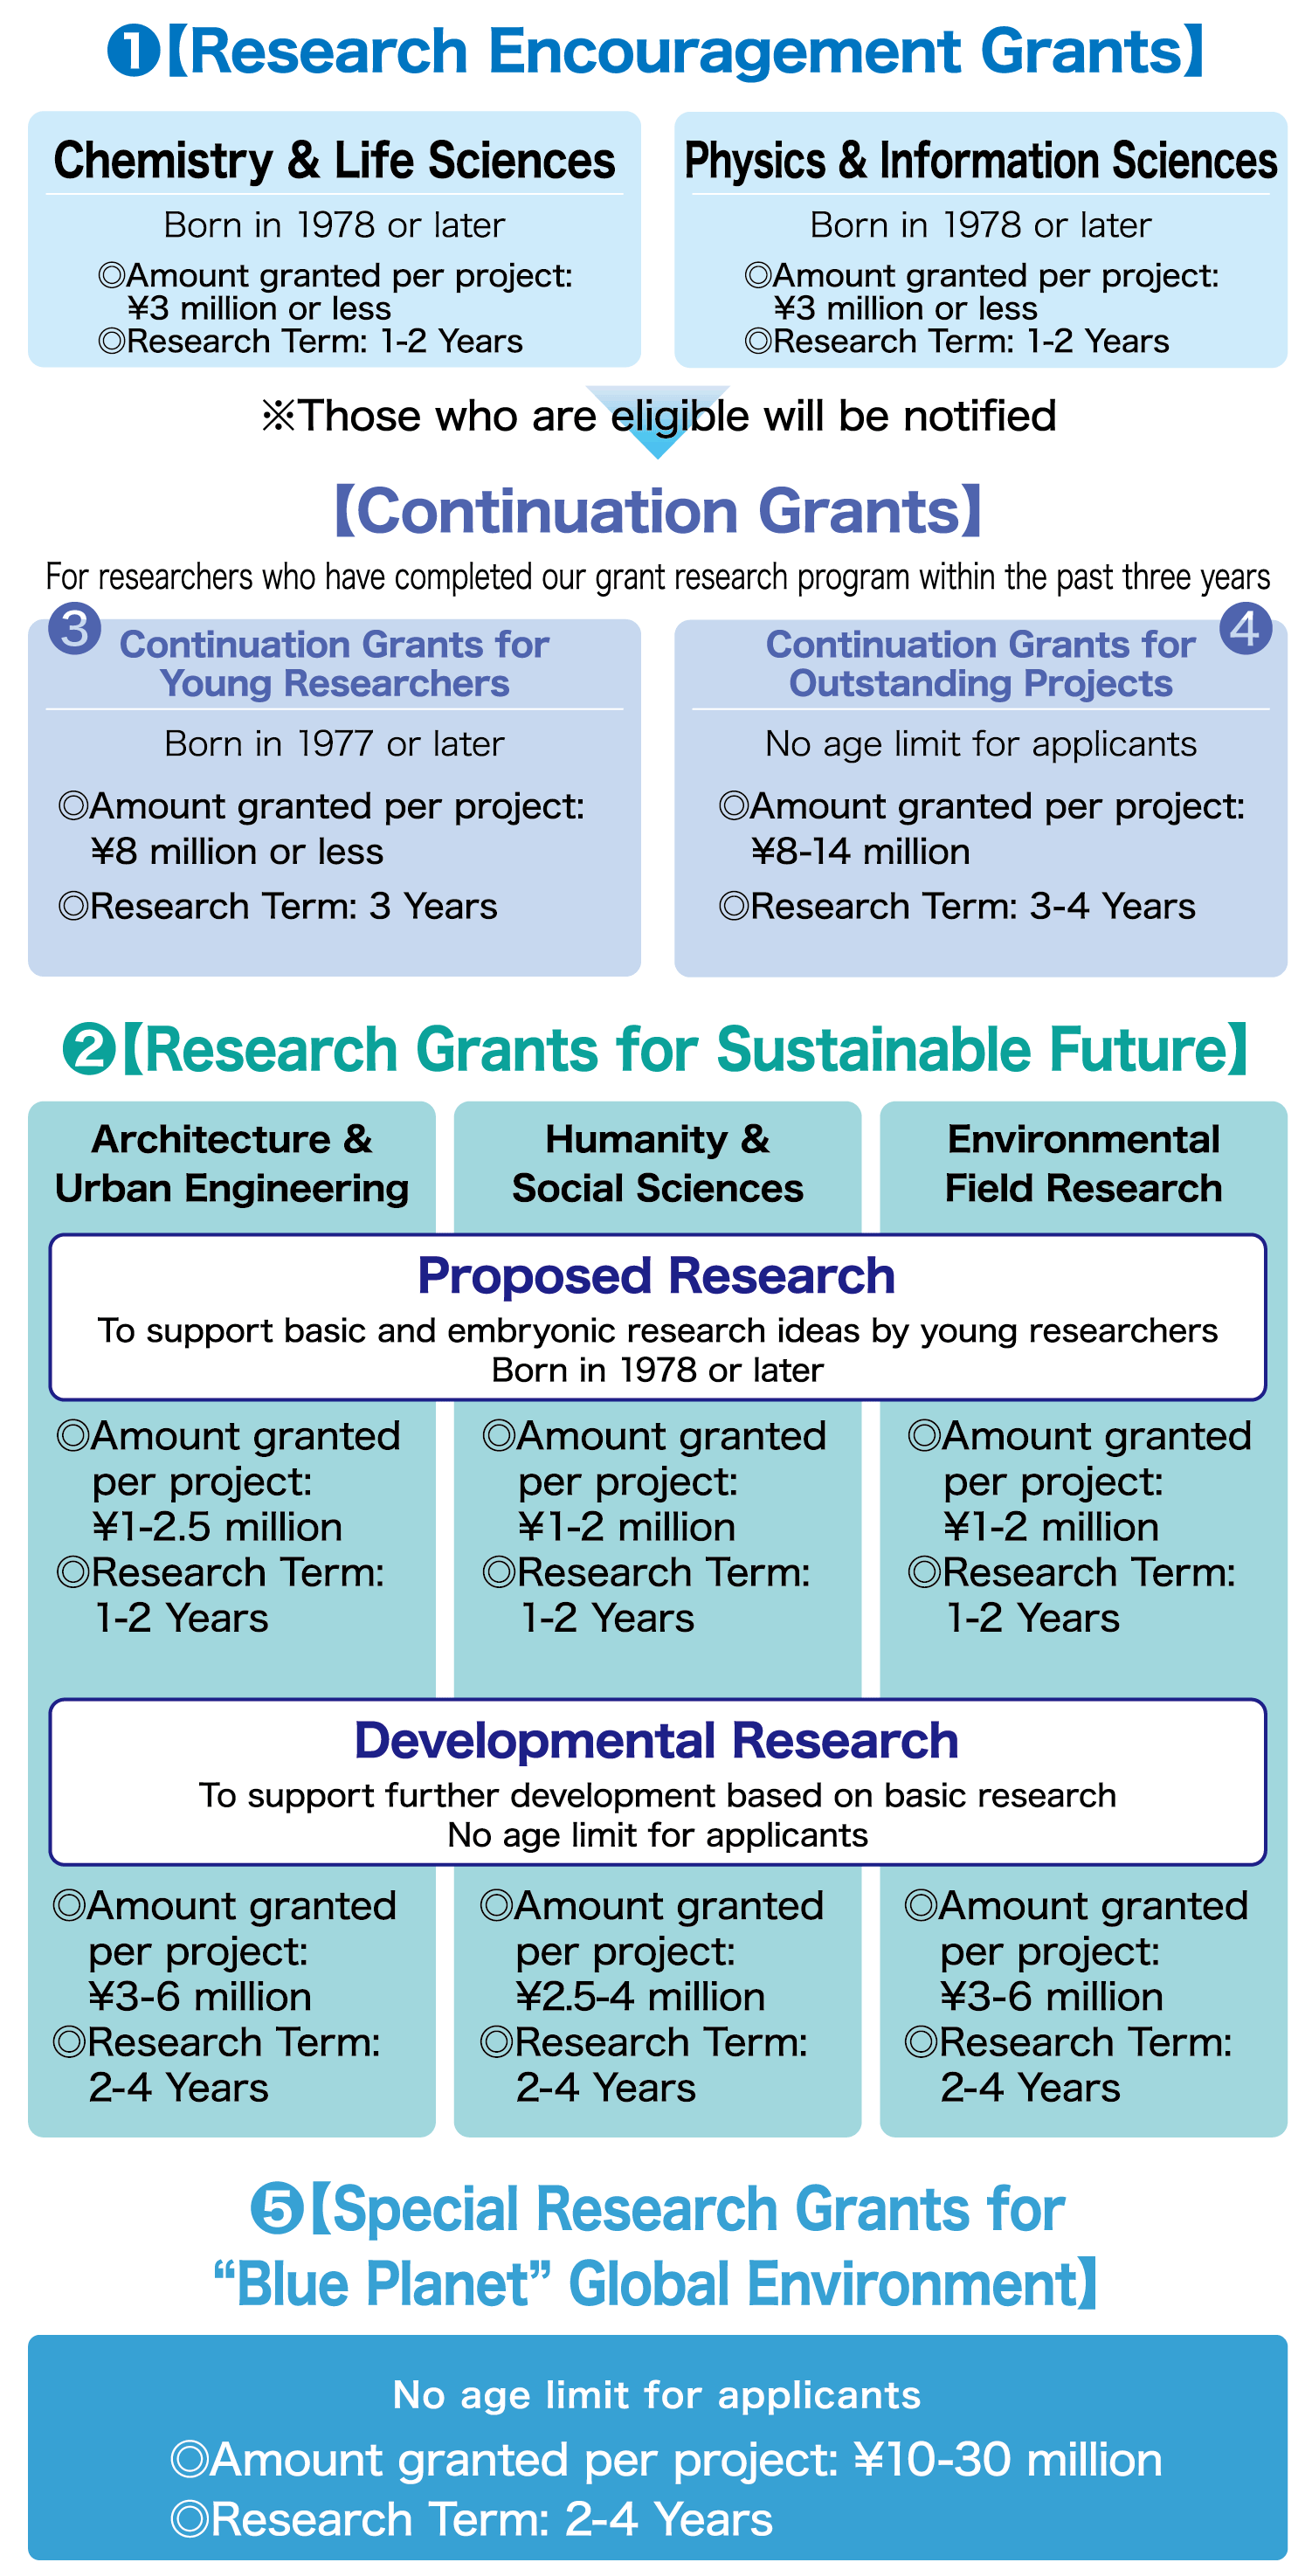 Research Encouragement Grants Research Grants for Sustainable Future Special Research Grants for 